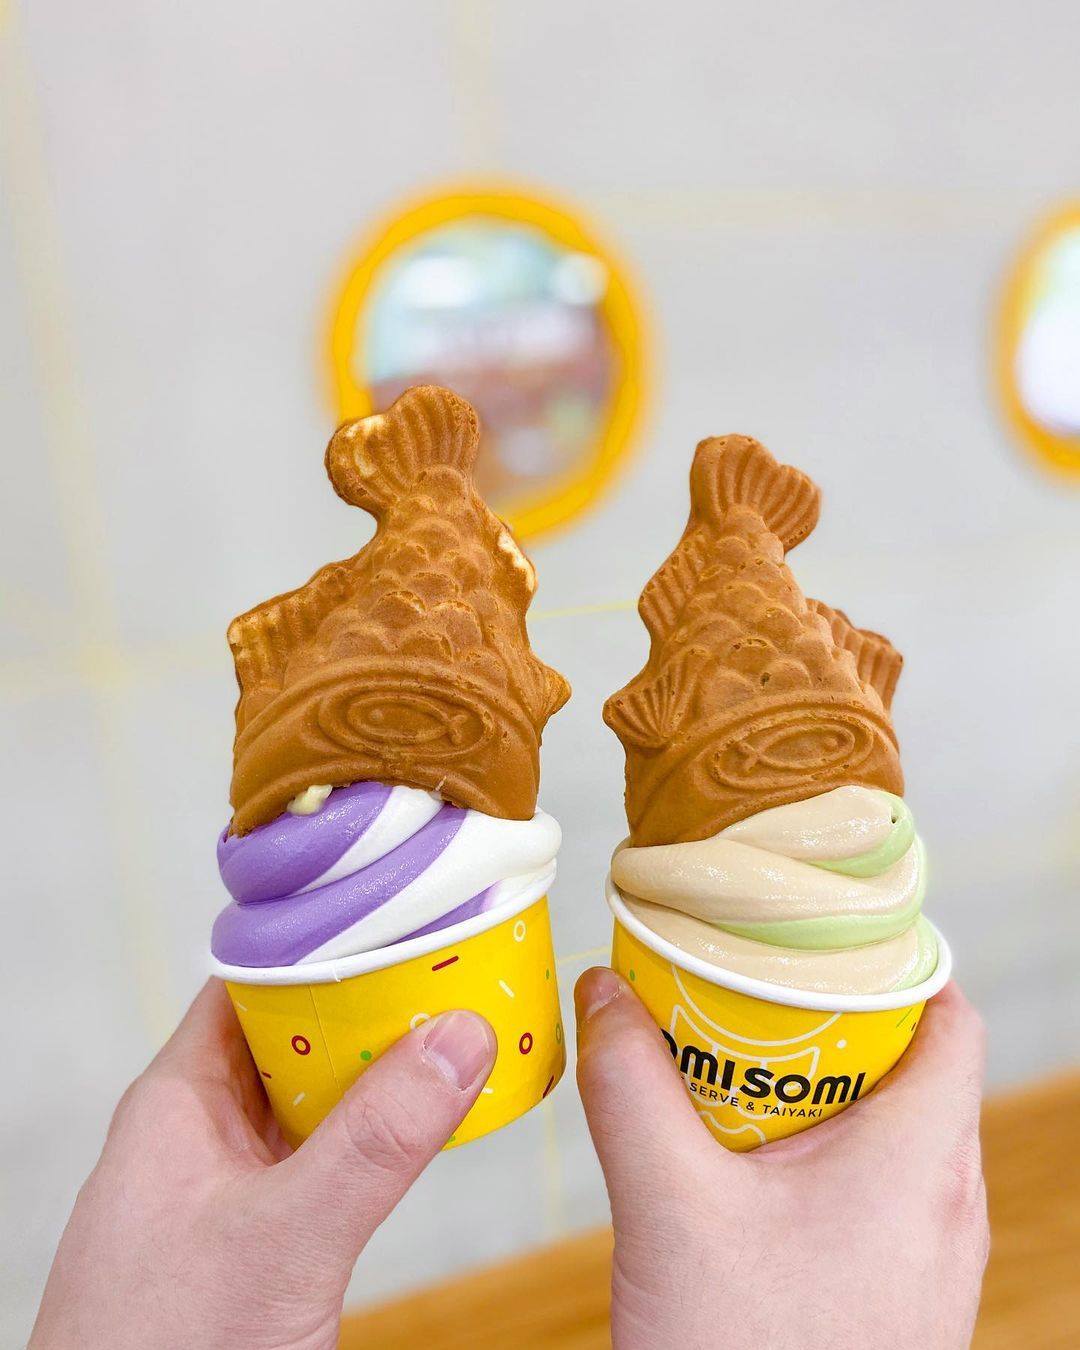 SomiSomi serves Korean ah-boong, fish-shaped waffles filled with ice cream.